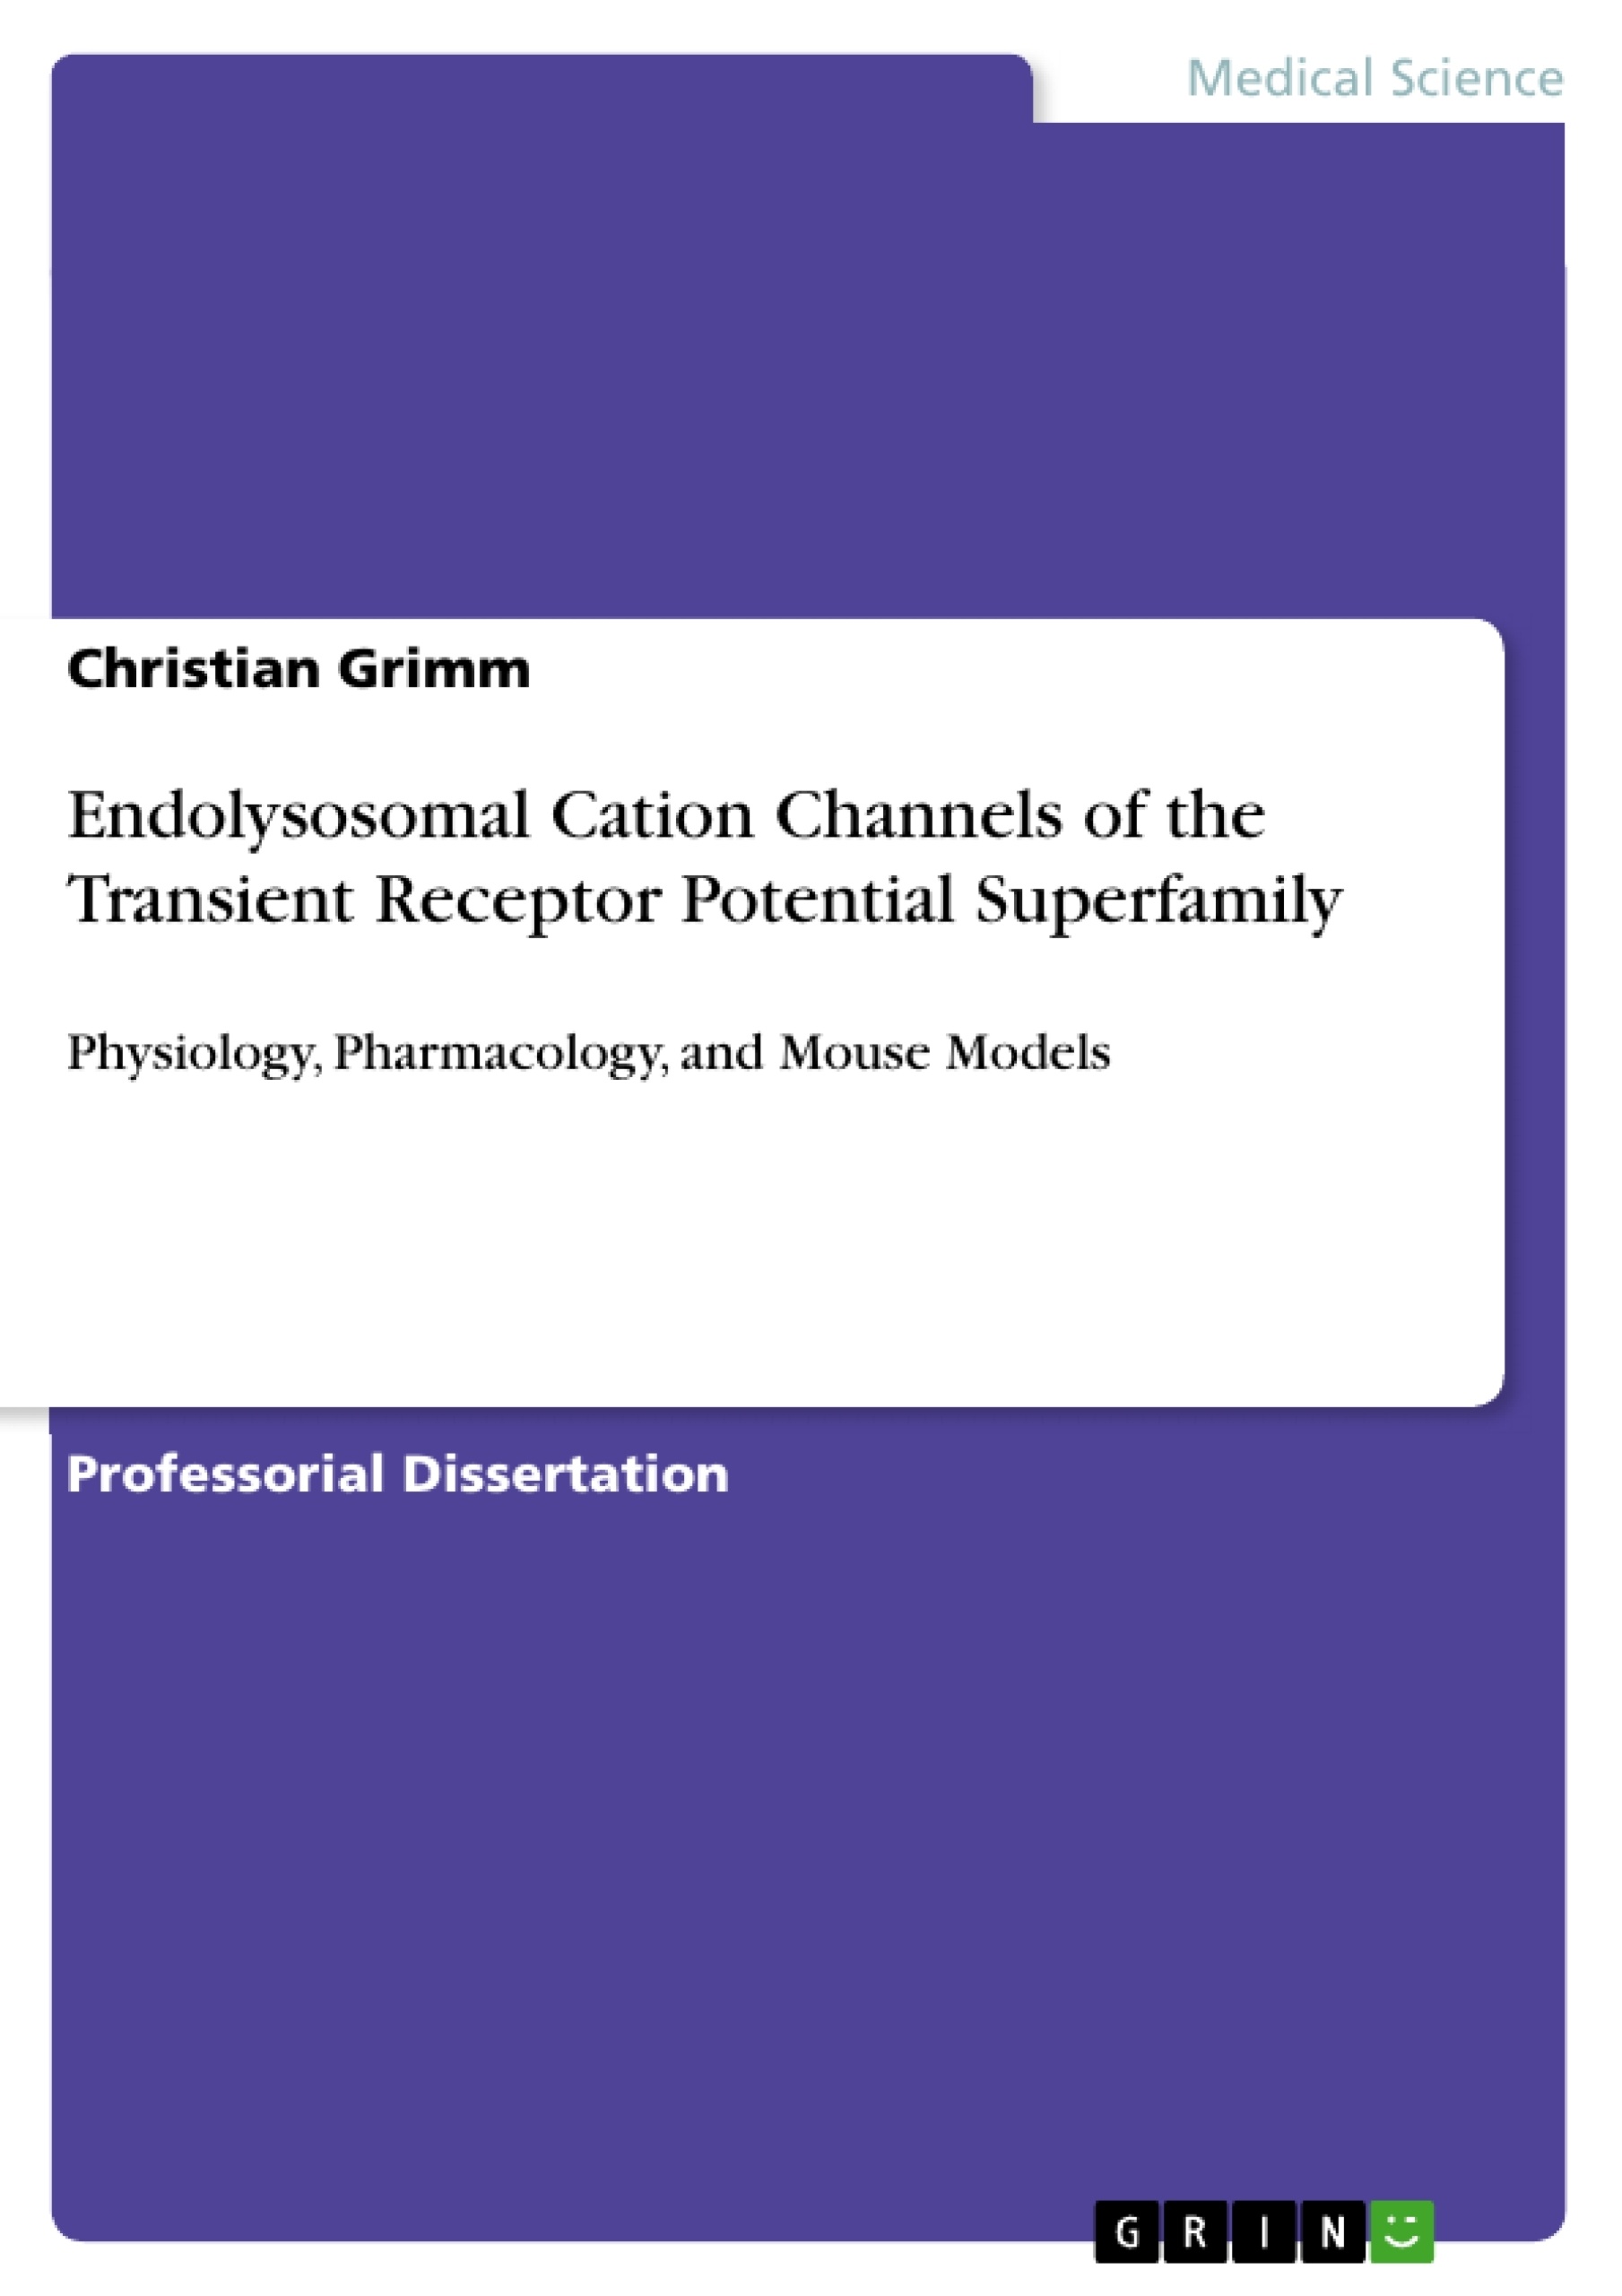 Titre: Endolysosomal Cation Channels of the Transient Receptor Potential Superfamily